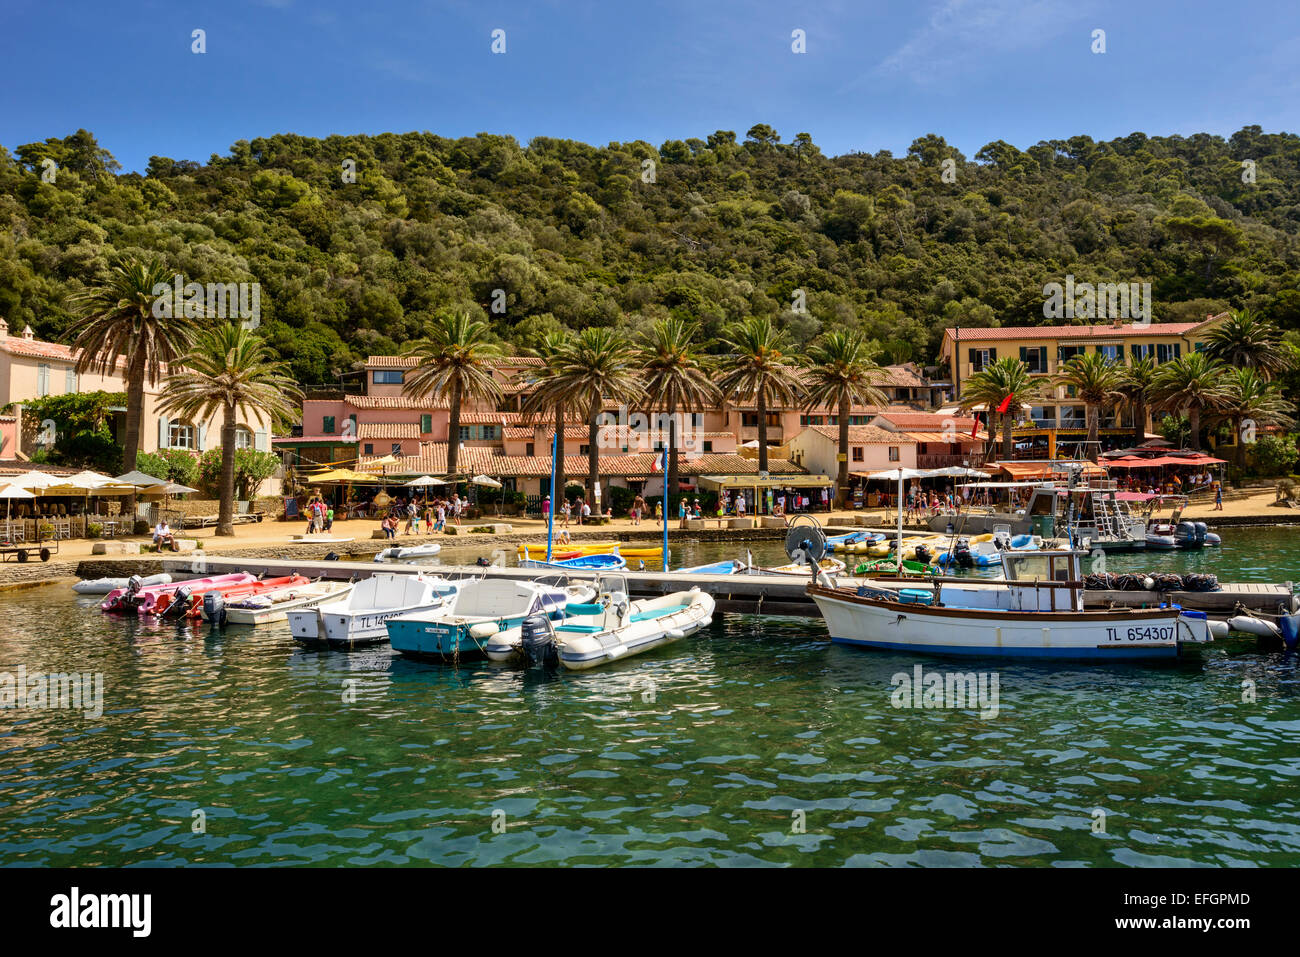 View of the habour on the Island of Port Cros, Var, PACA, Provence-Alpes-Cote d'Azur, France Stock Photo